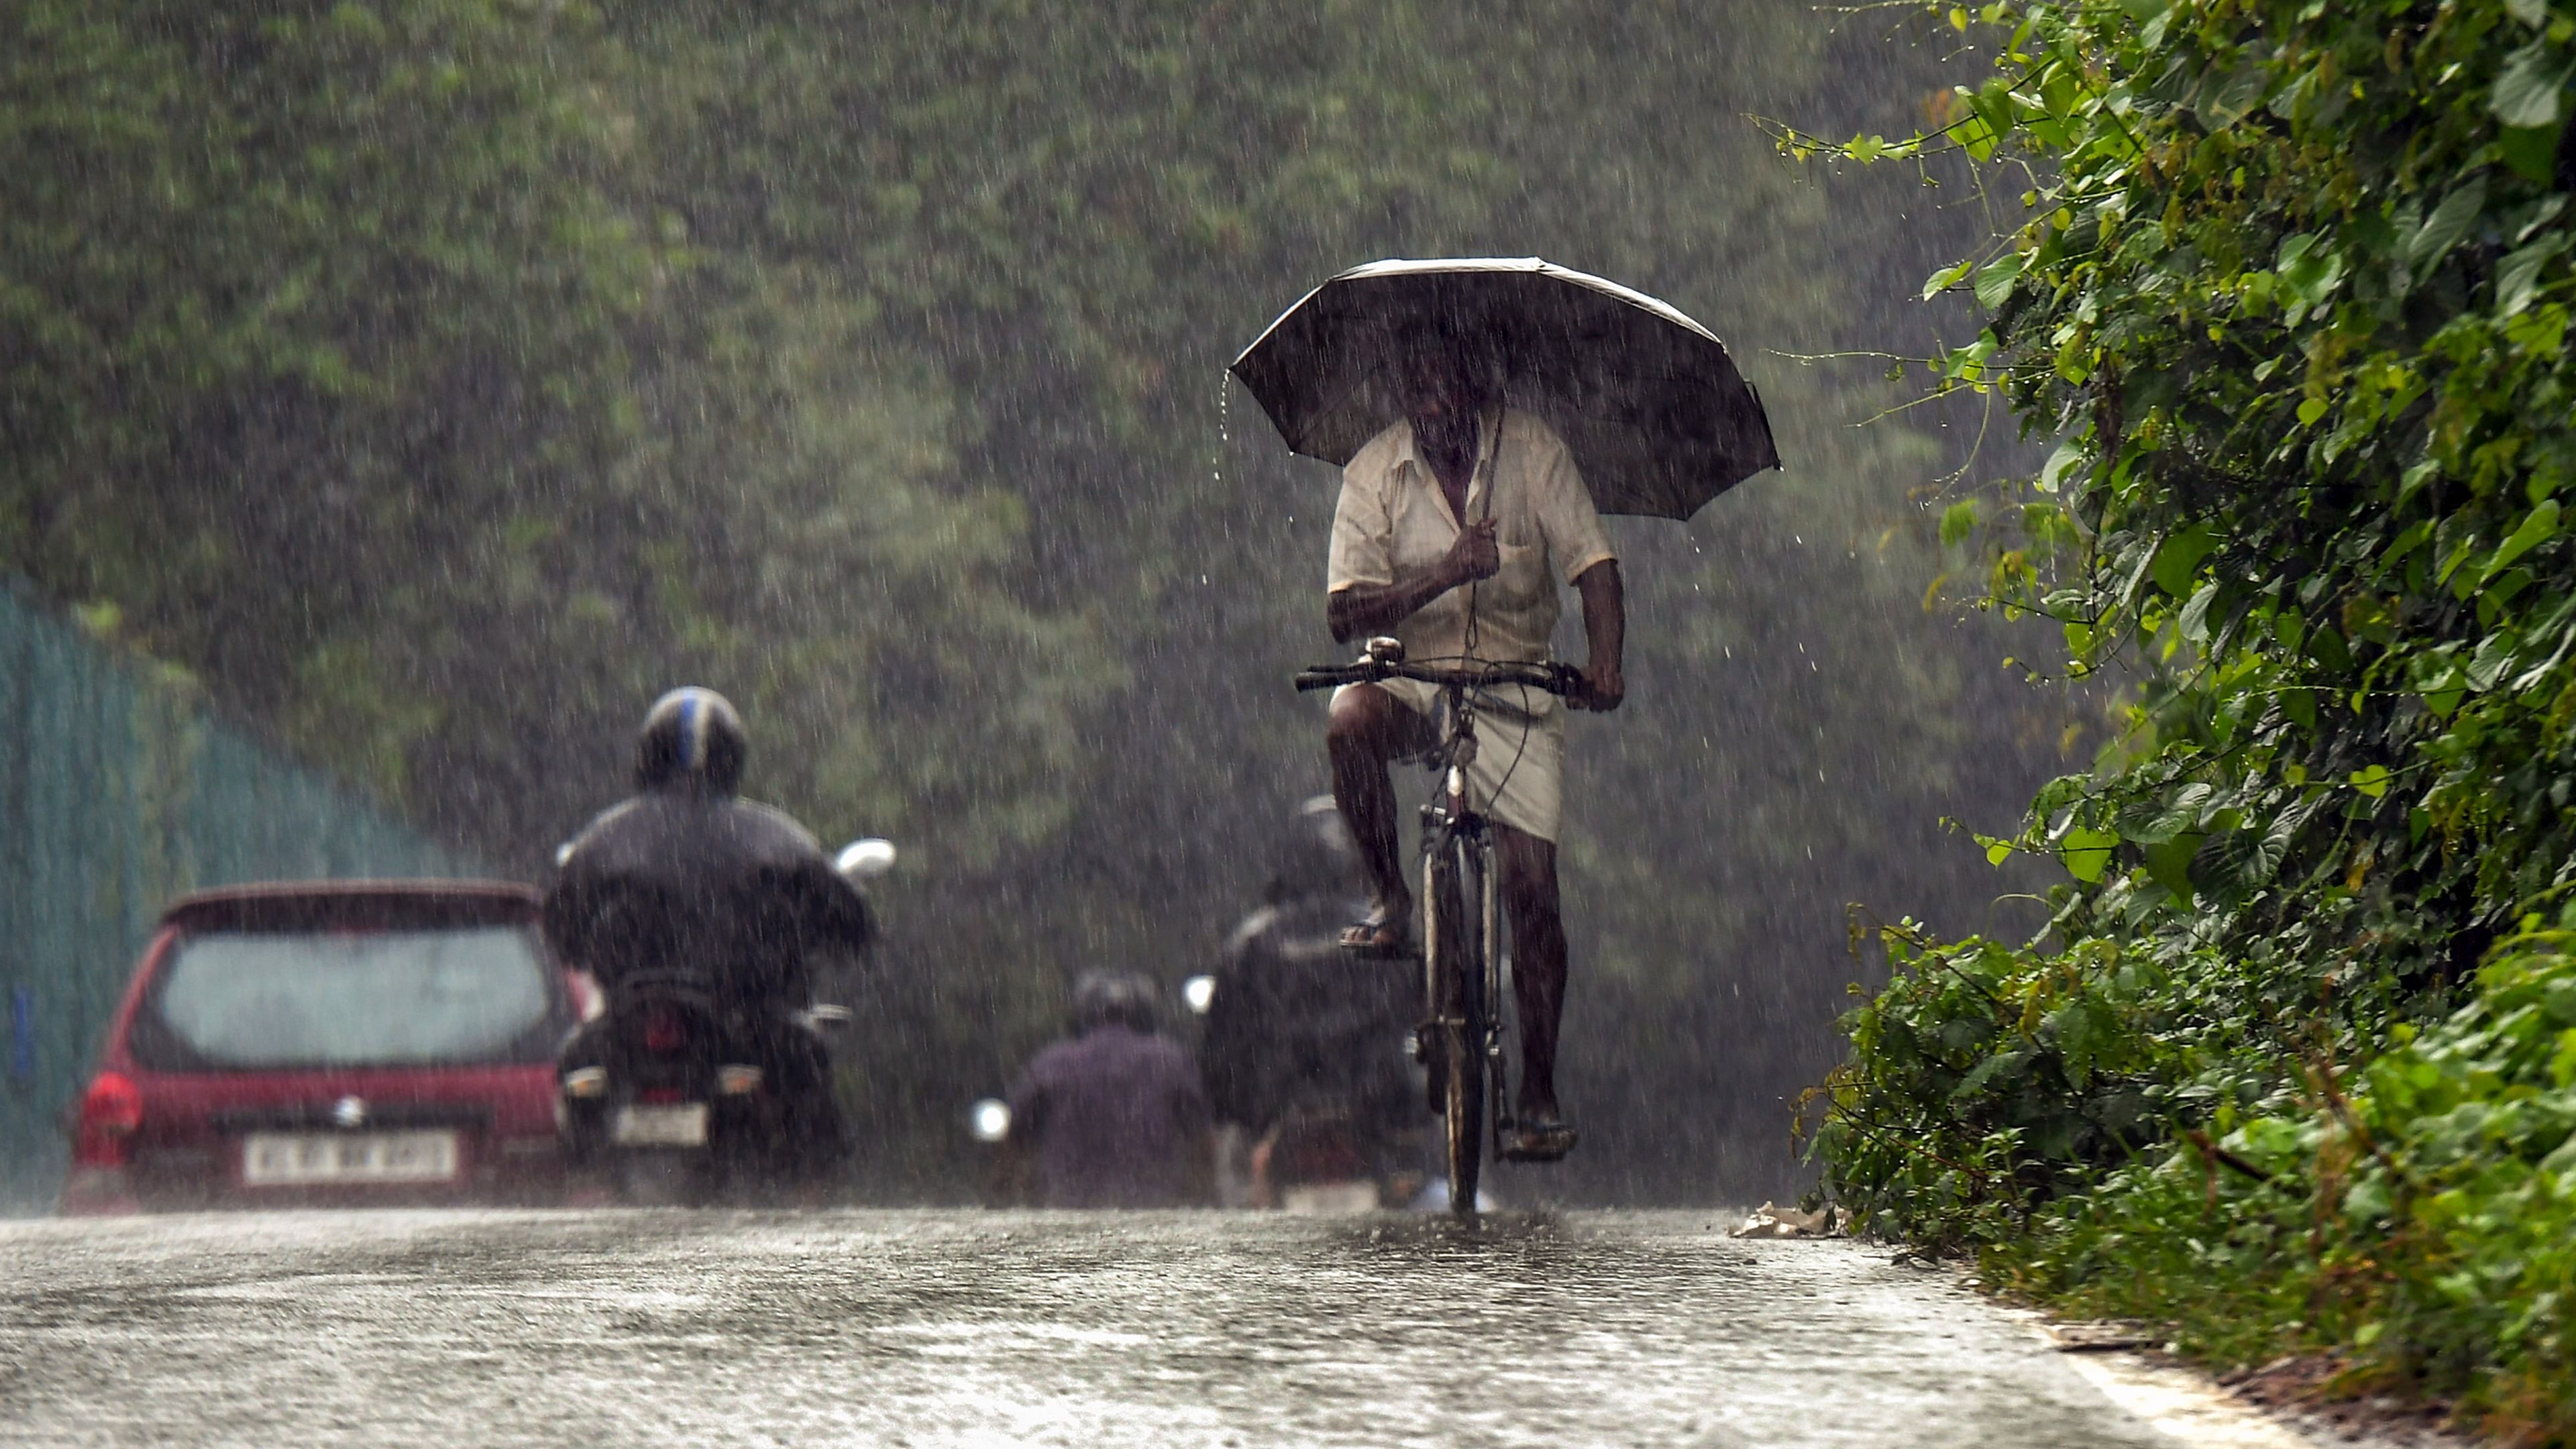 Kerala is set to receive heavy rain for four days starting from Sunday, the India Meteorological Department (IMD) said, adding that it has issued a yellow alert for Alappuzha, Kottayam, Ernakulam, Idukki, Thrissur, Palakkad and Malappuram districts. Credit: PTI File Photo